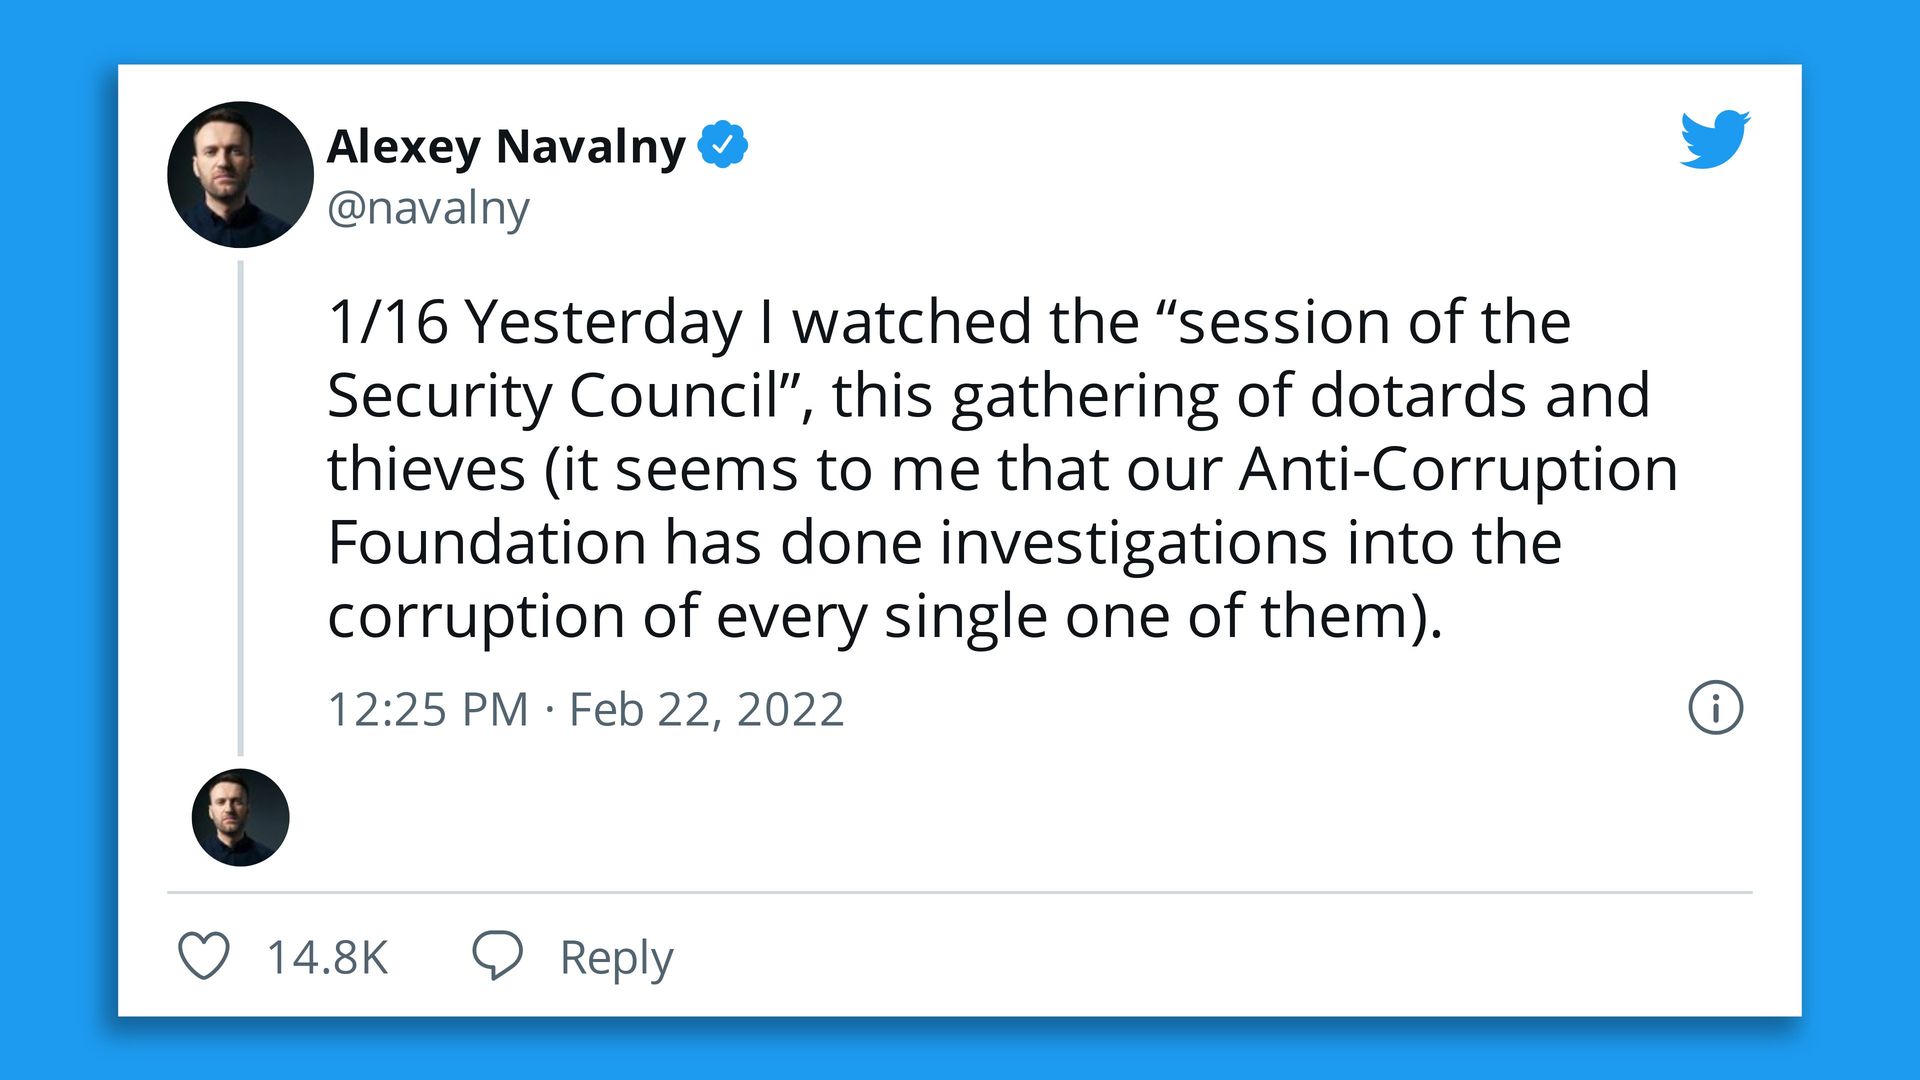 A Twitter thread shows the response given by Russian political prisoner Alexey Navalny